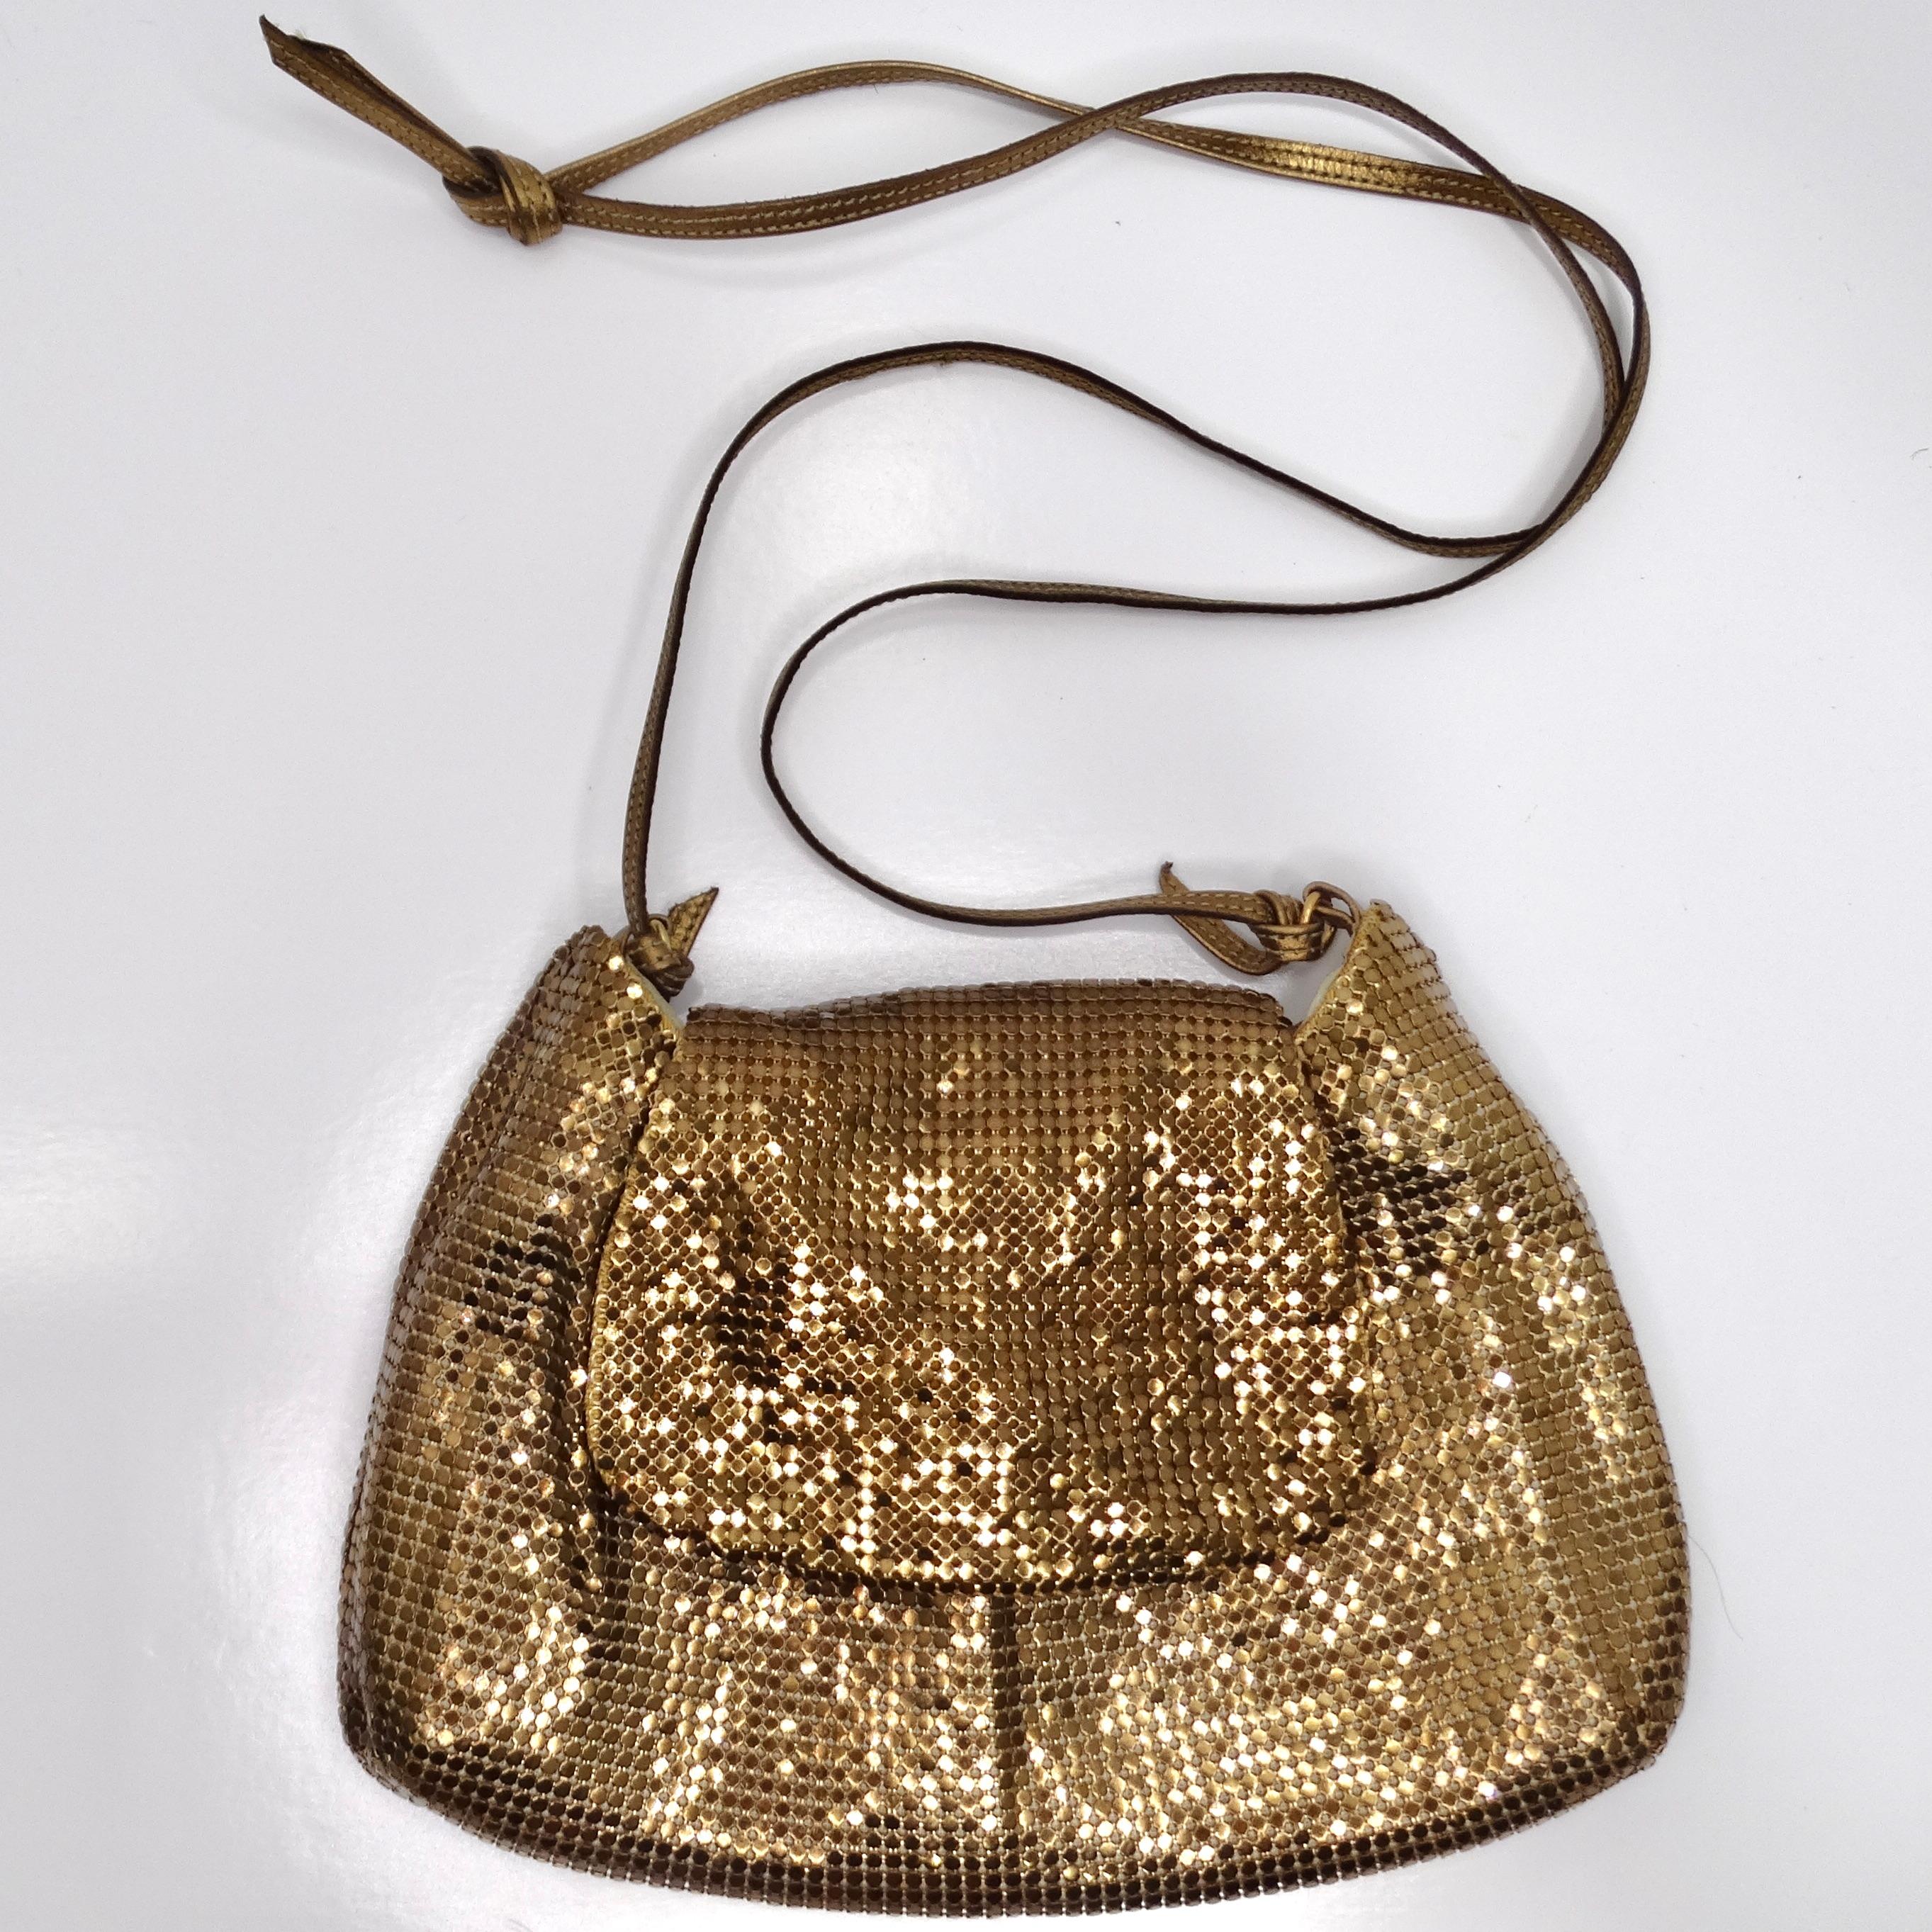 Whiting & Davis Gold Tone Chain Mail Crossbody Bag In Excellent Condition For Sale In Scottsdale, AZ